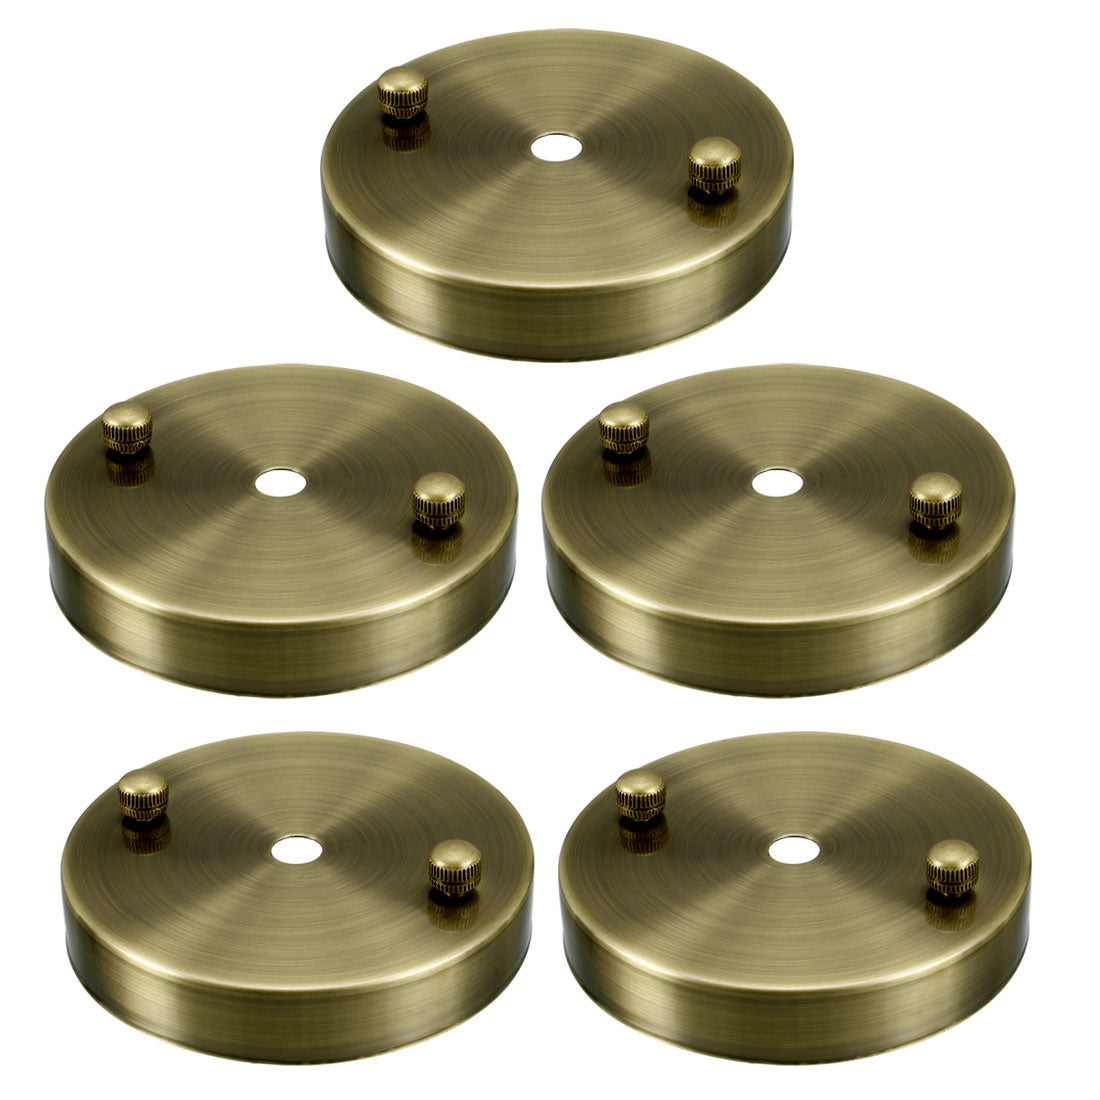 uxcell Uxcell Retro Ceiling Light Plate Pointed Base Chassis Disc Pendant Accessories 100mmx20mm Bronze w Screw 5pcs